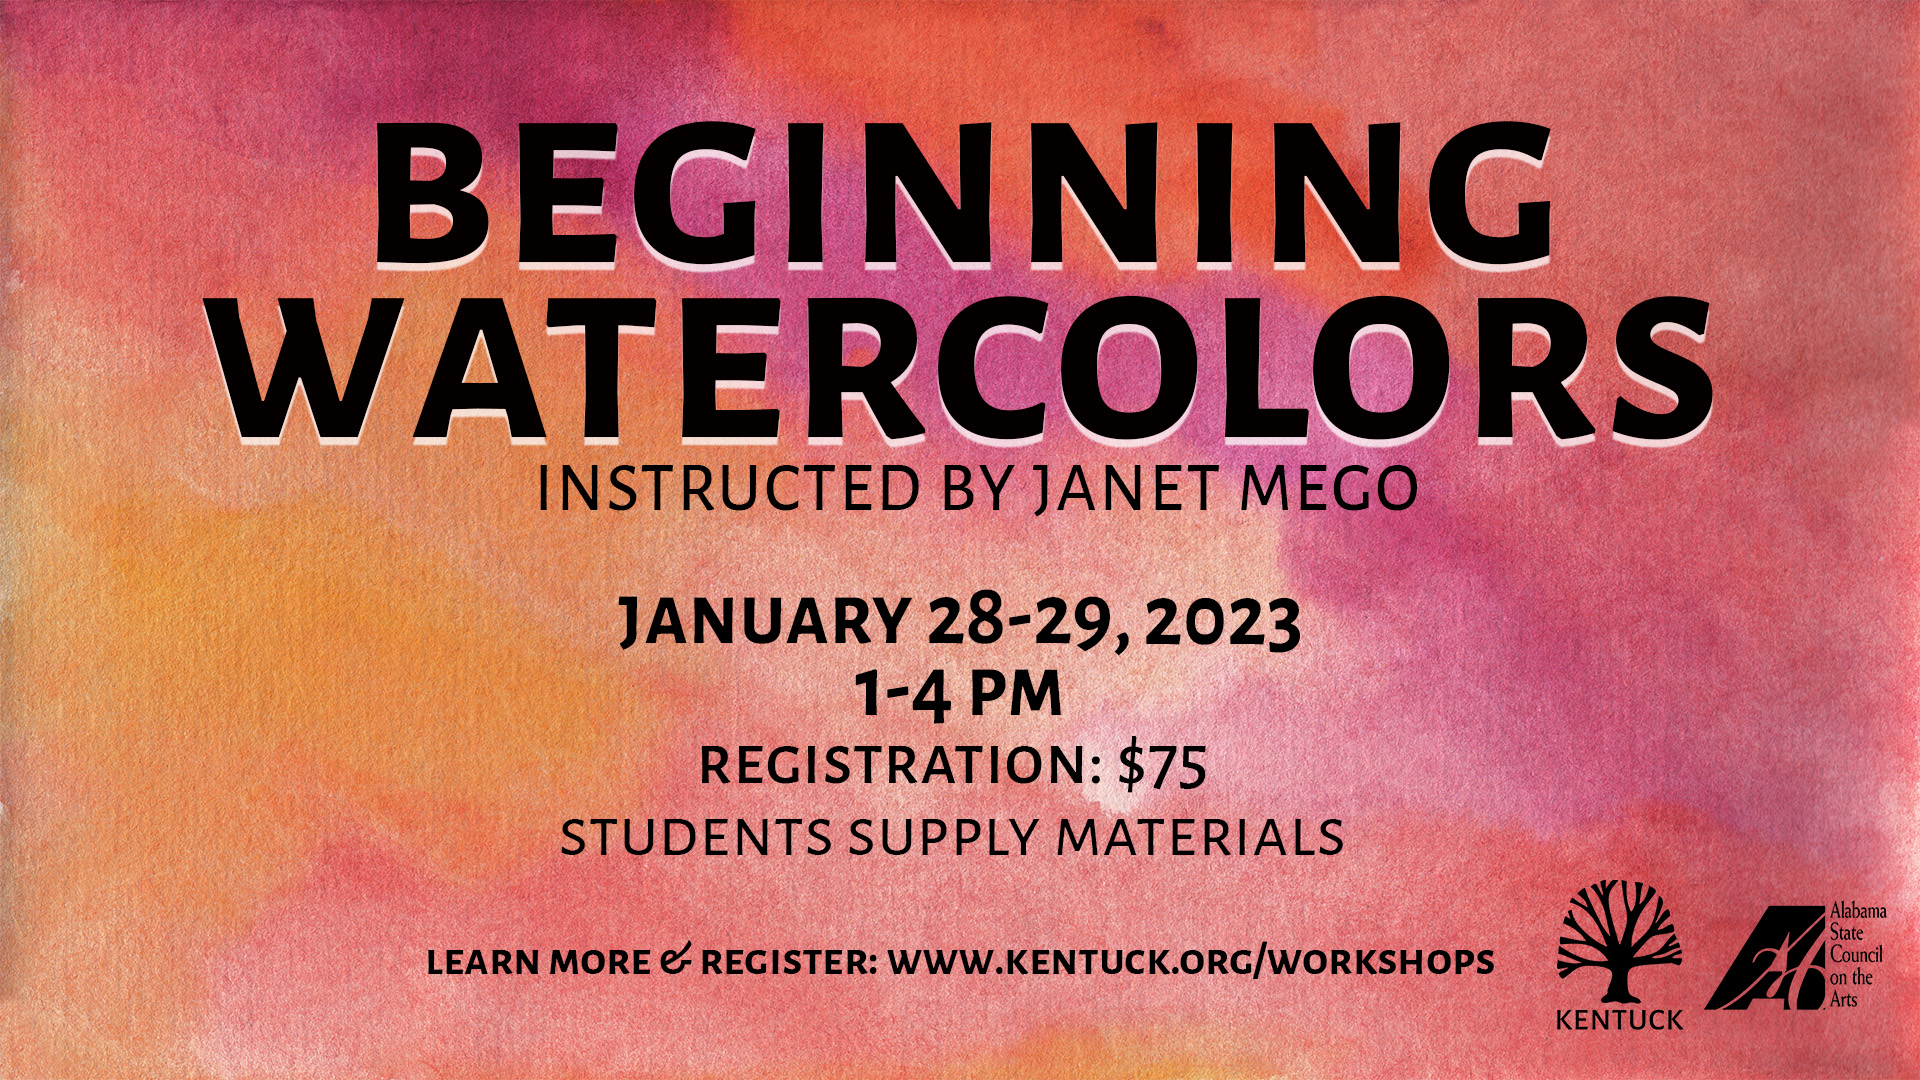 Begining Watercolors with Janet Mego